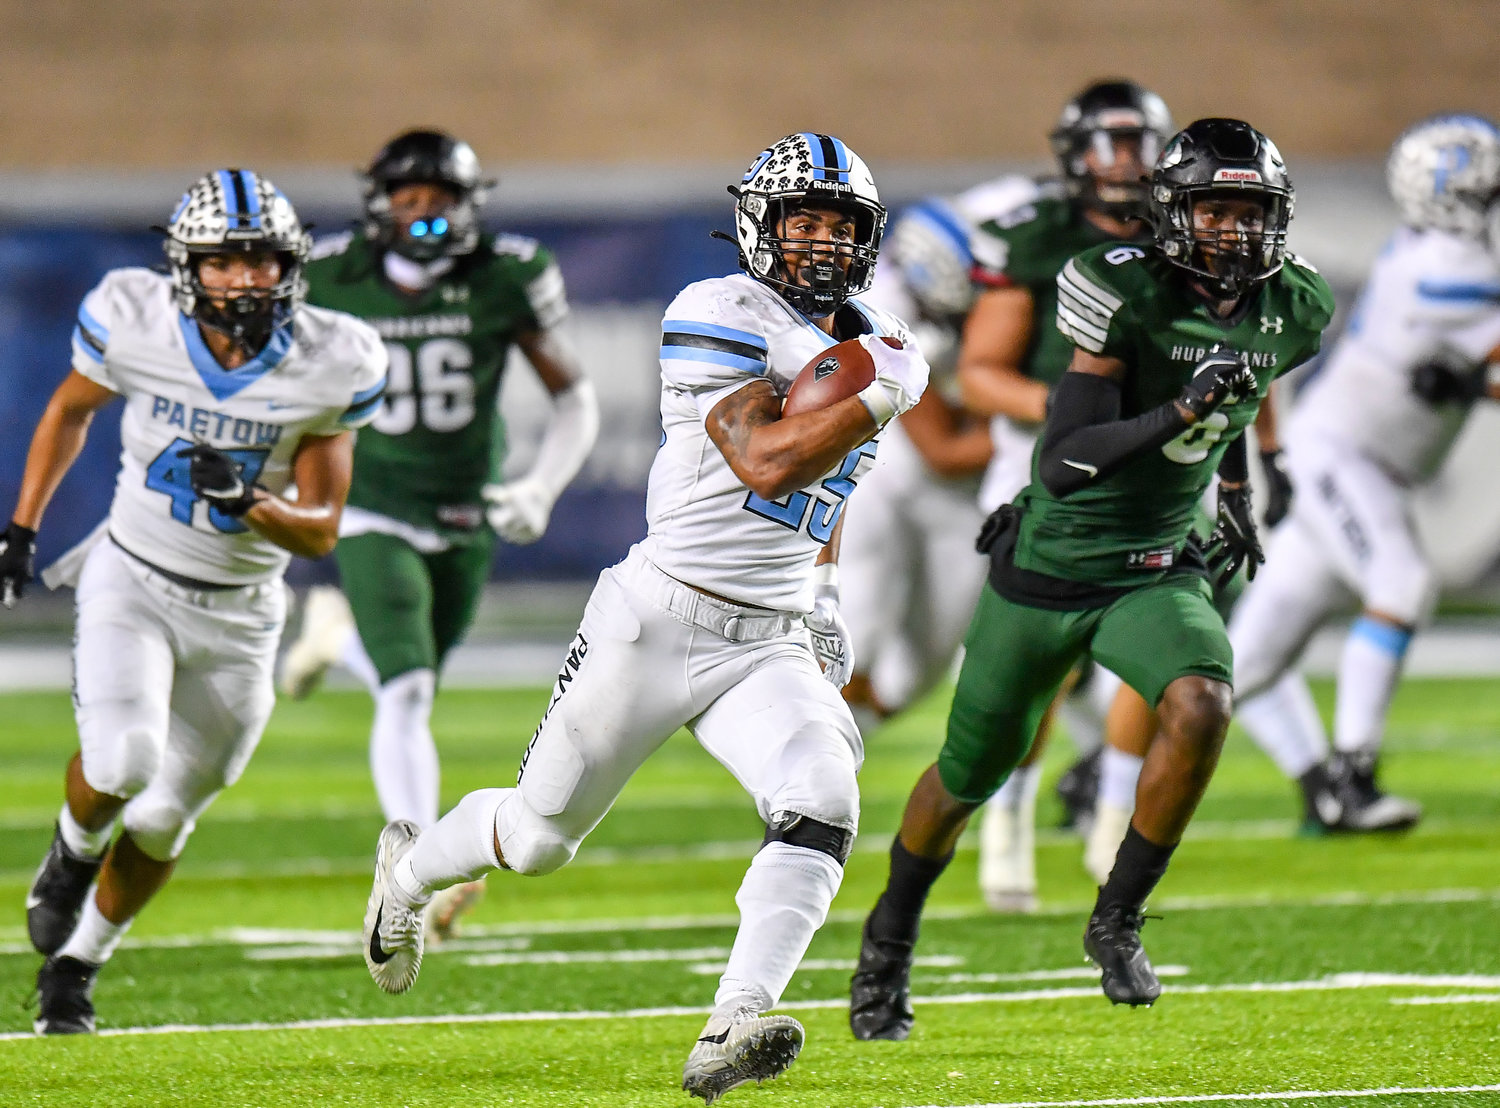 Houston, Tx. Dec 3, 2021: Paetow's Jacob Brown #25 carries the ball on a 60 yard run for a TD during the quarterfinal playoff game between Paetow and F,B. Hightower at Rice Stadium in Houston. (Photo by Mark Gooman / Katy Times)